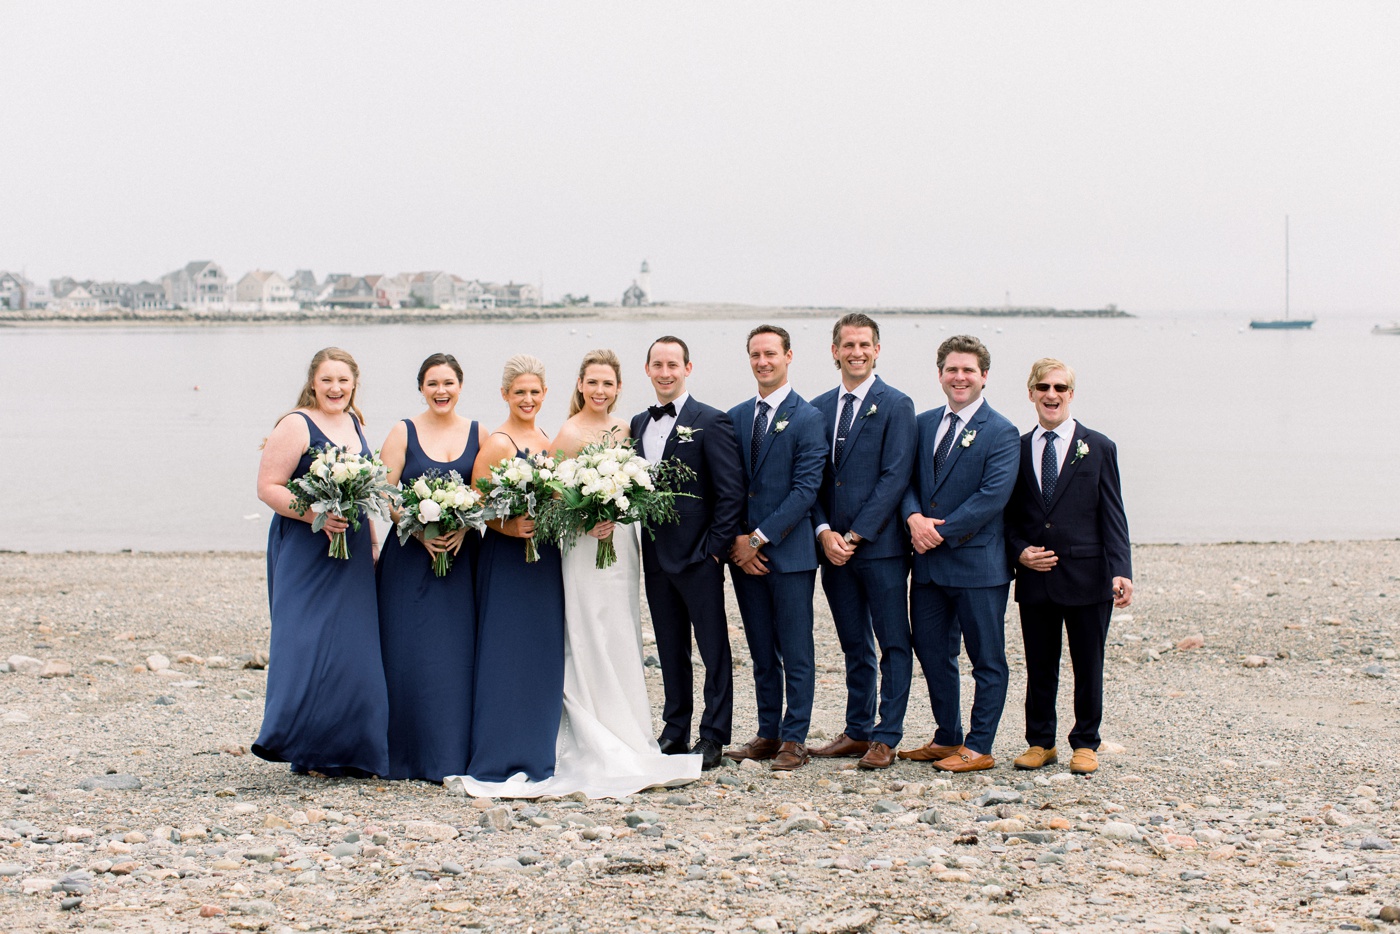 Bridal party portraits on the beach in Scituate, MA